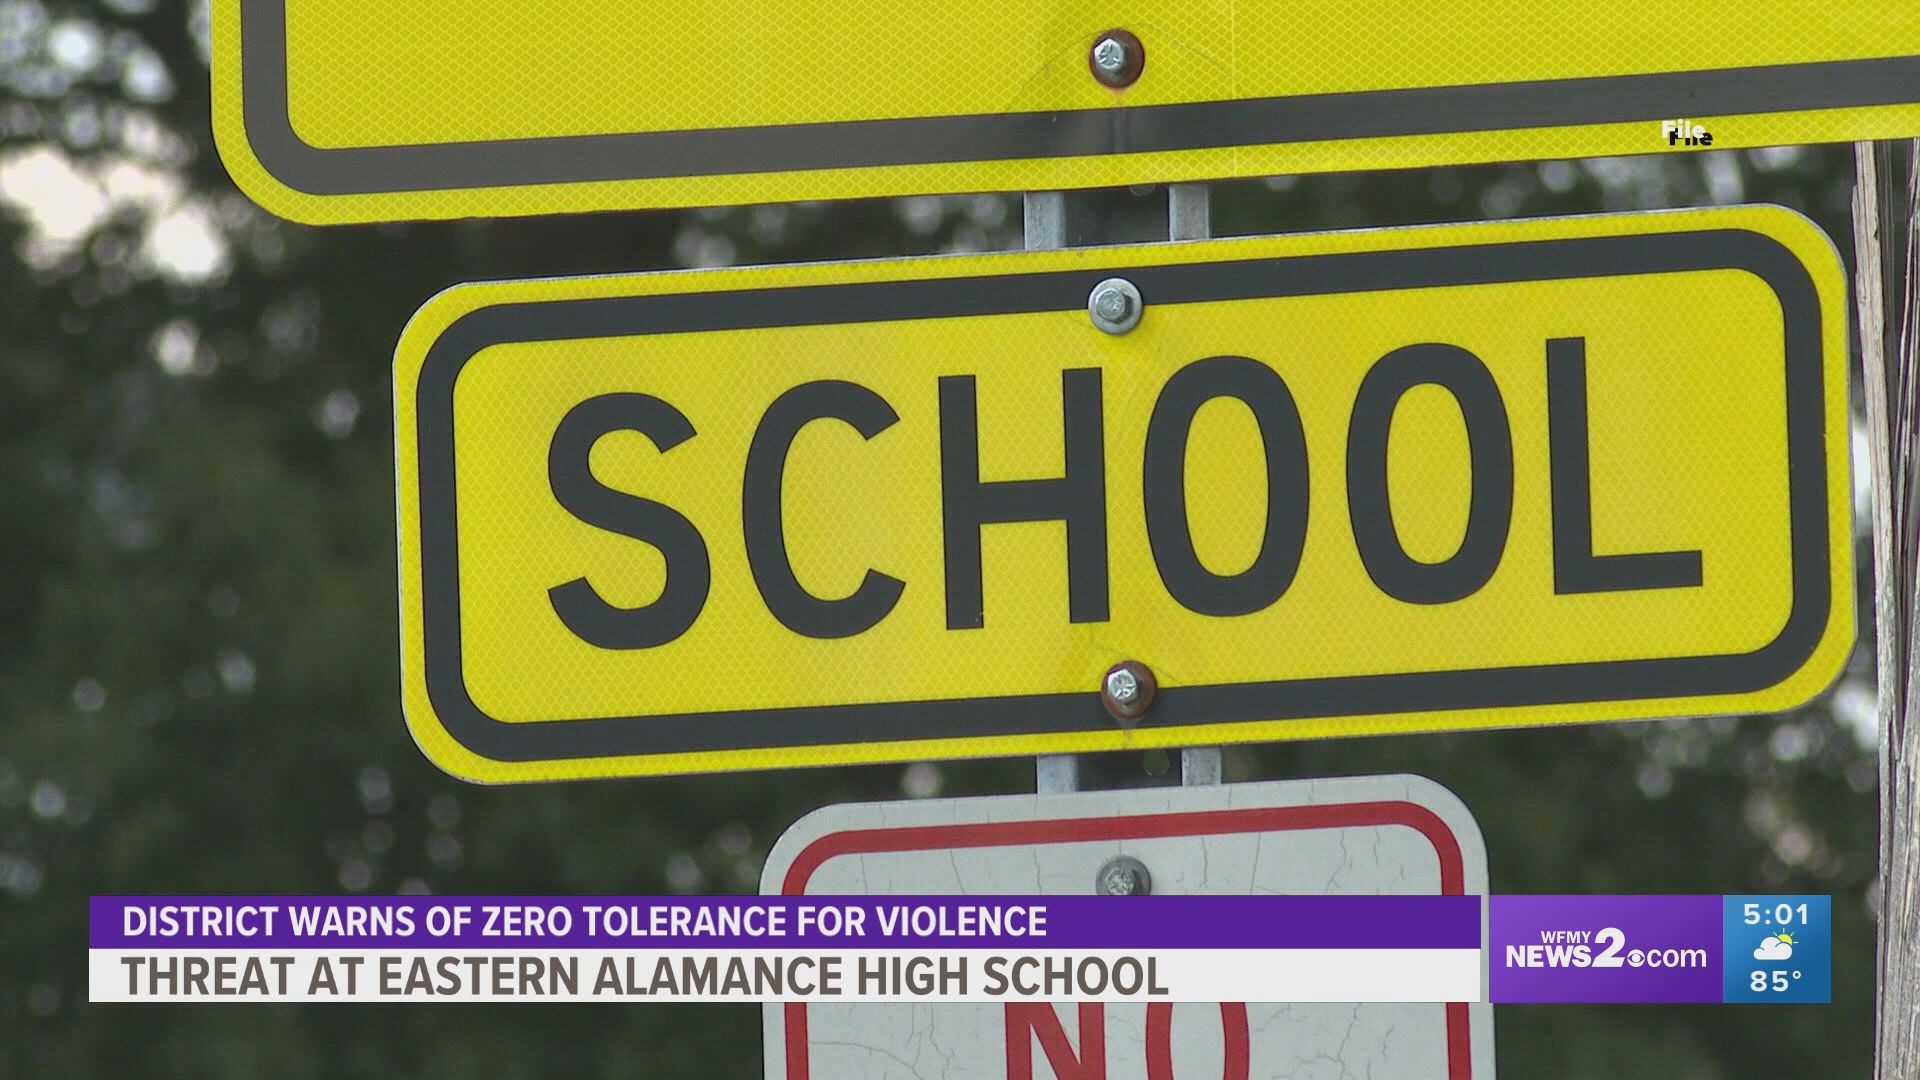 On Thursday, the district said there was a text message threat at Eastern Alamance High School along with a BB gun confiscated.